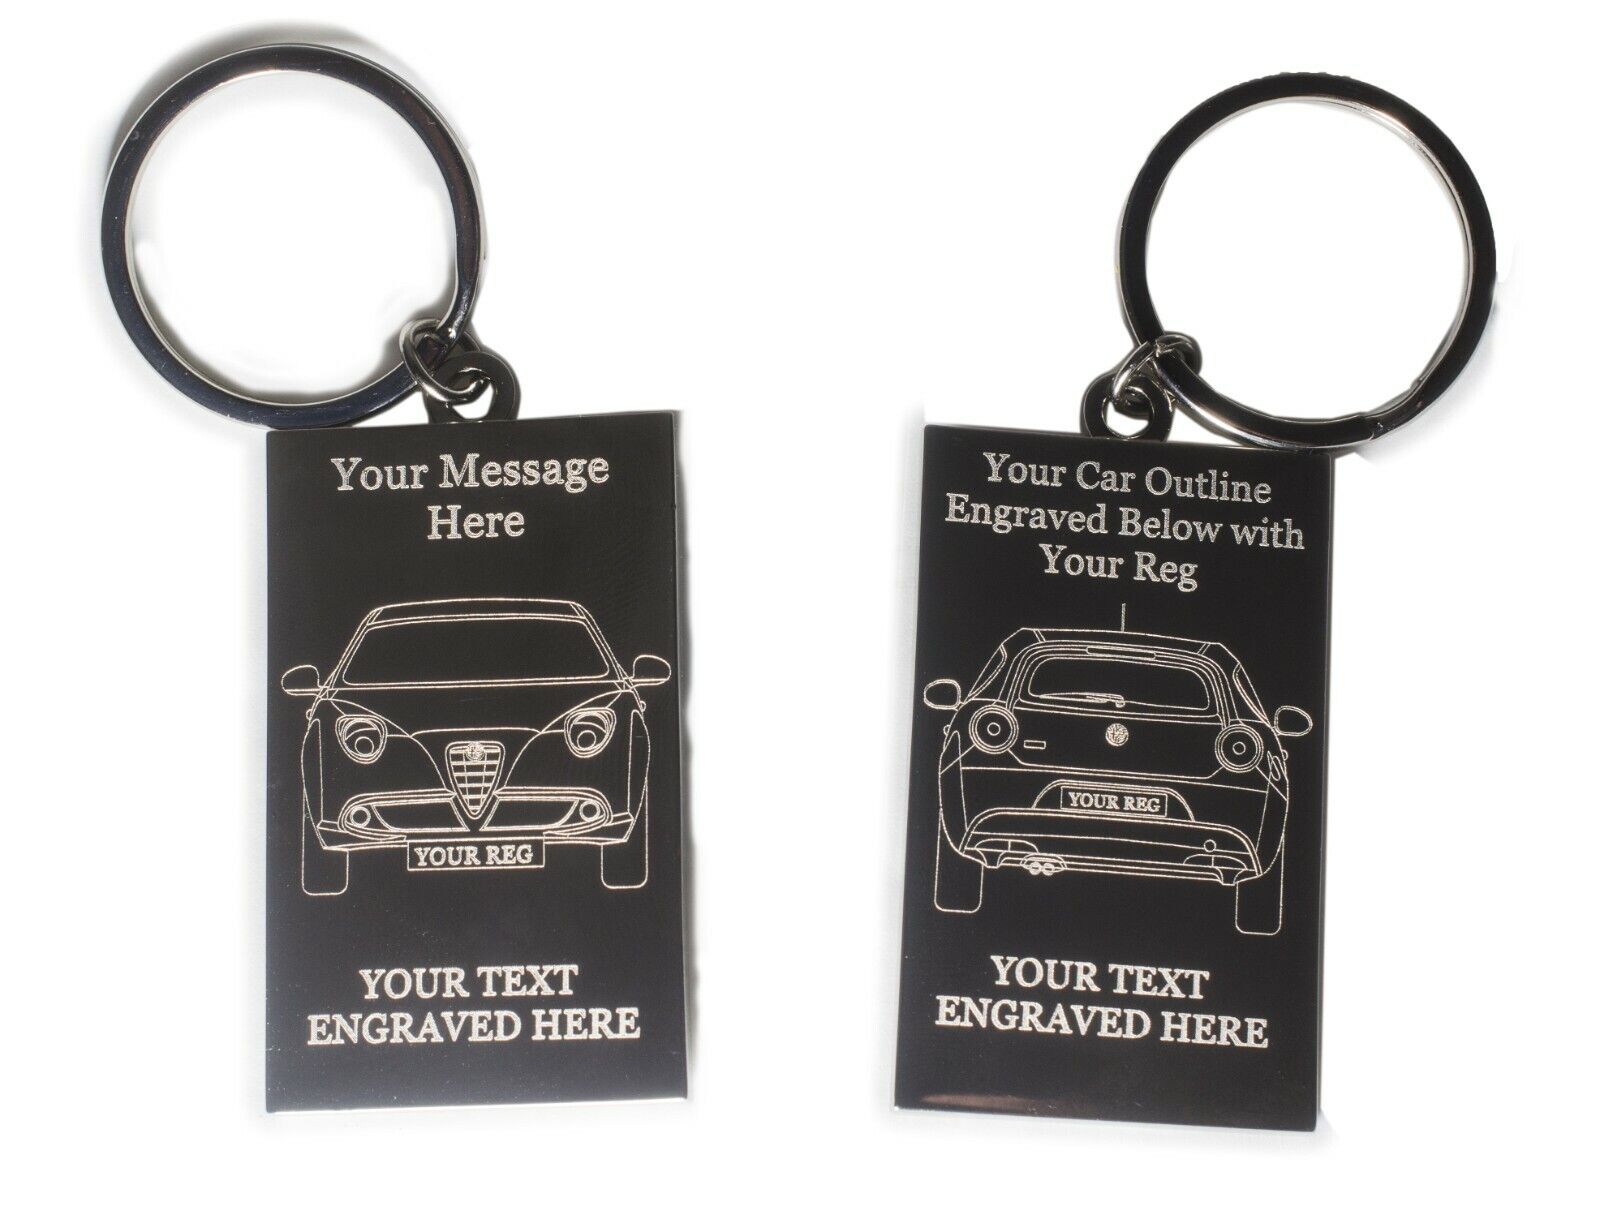 Your Car on Your Keyring - Engraved Outline Front and Back and Registration No.